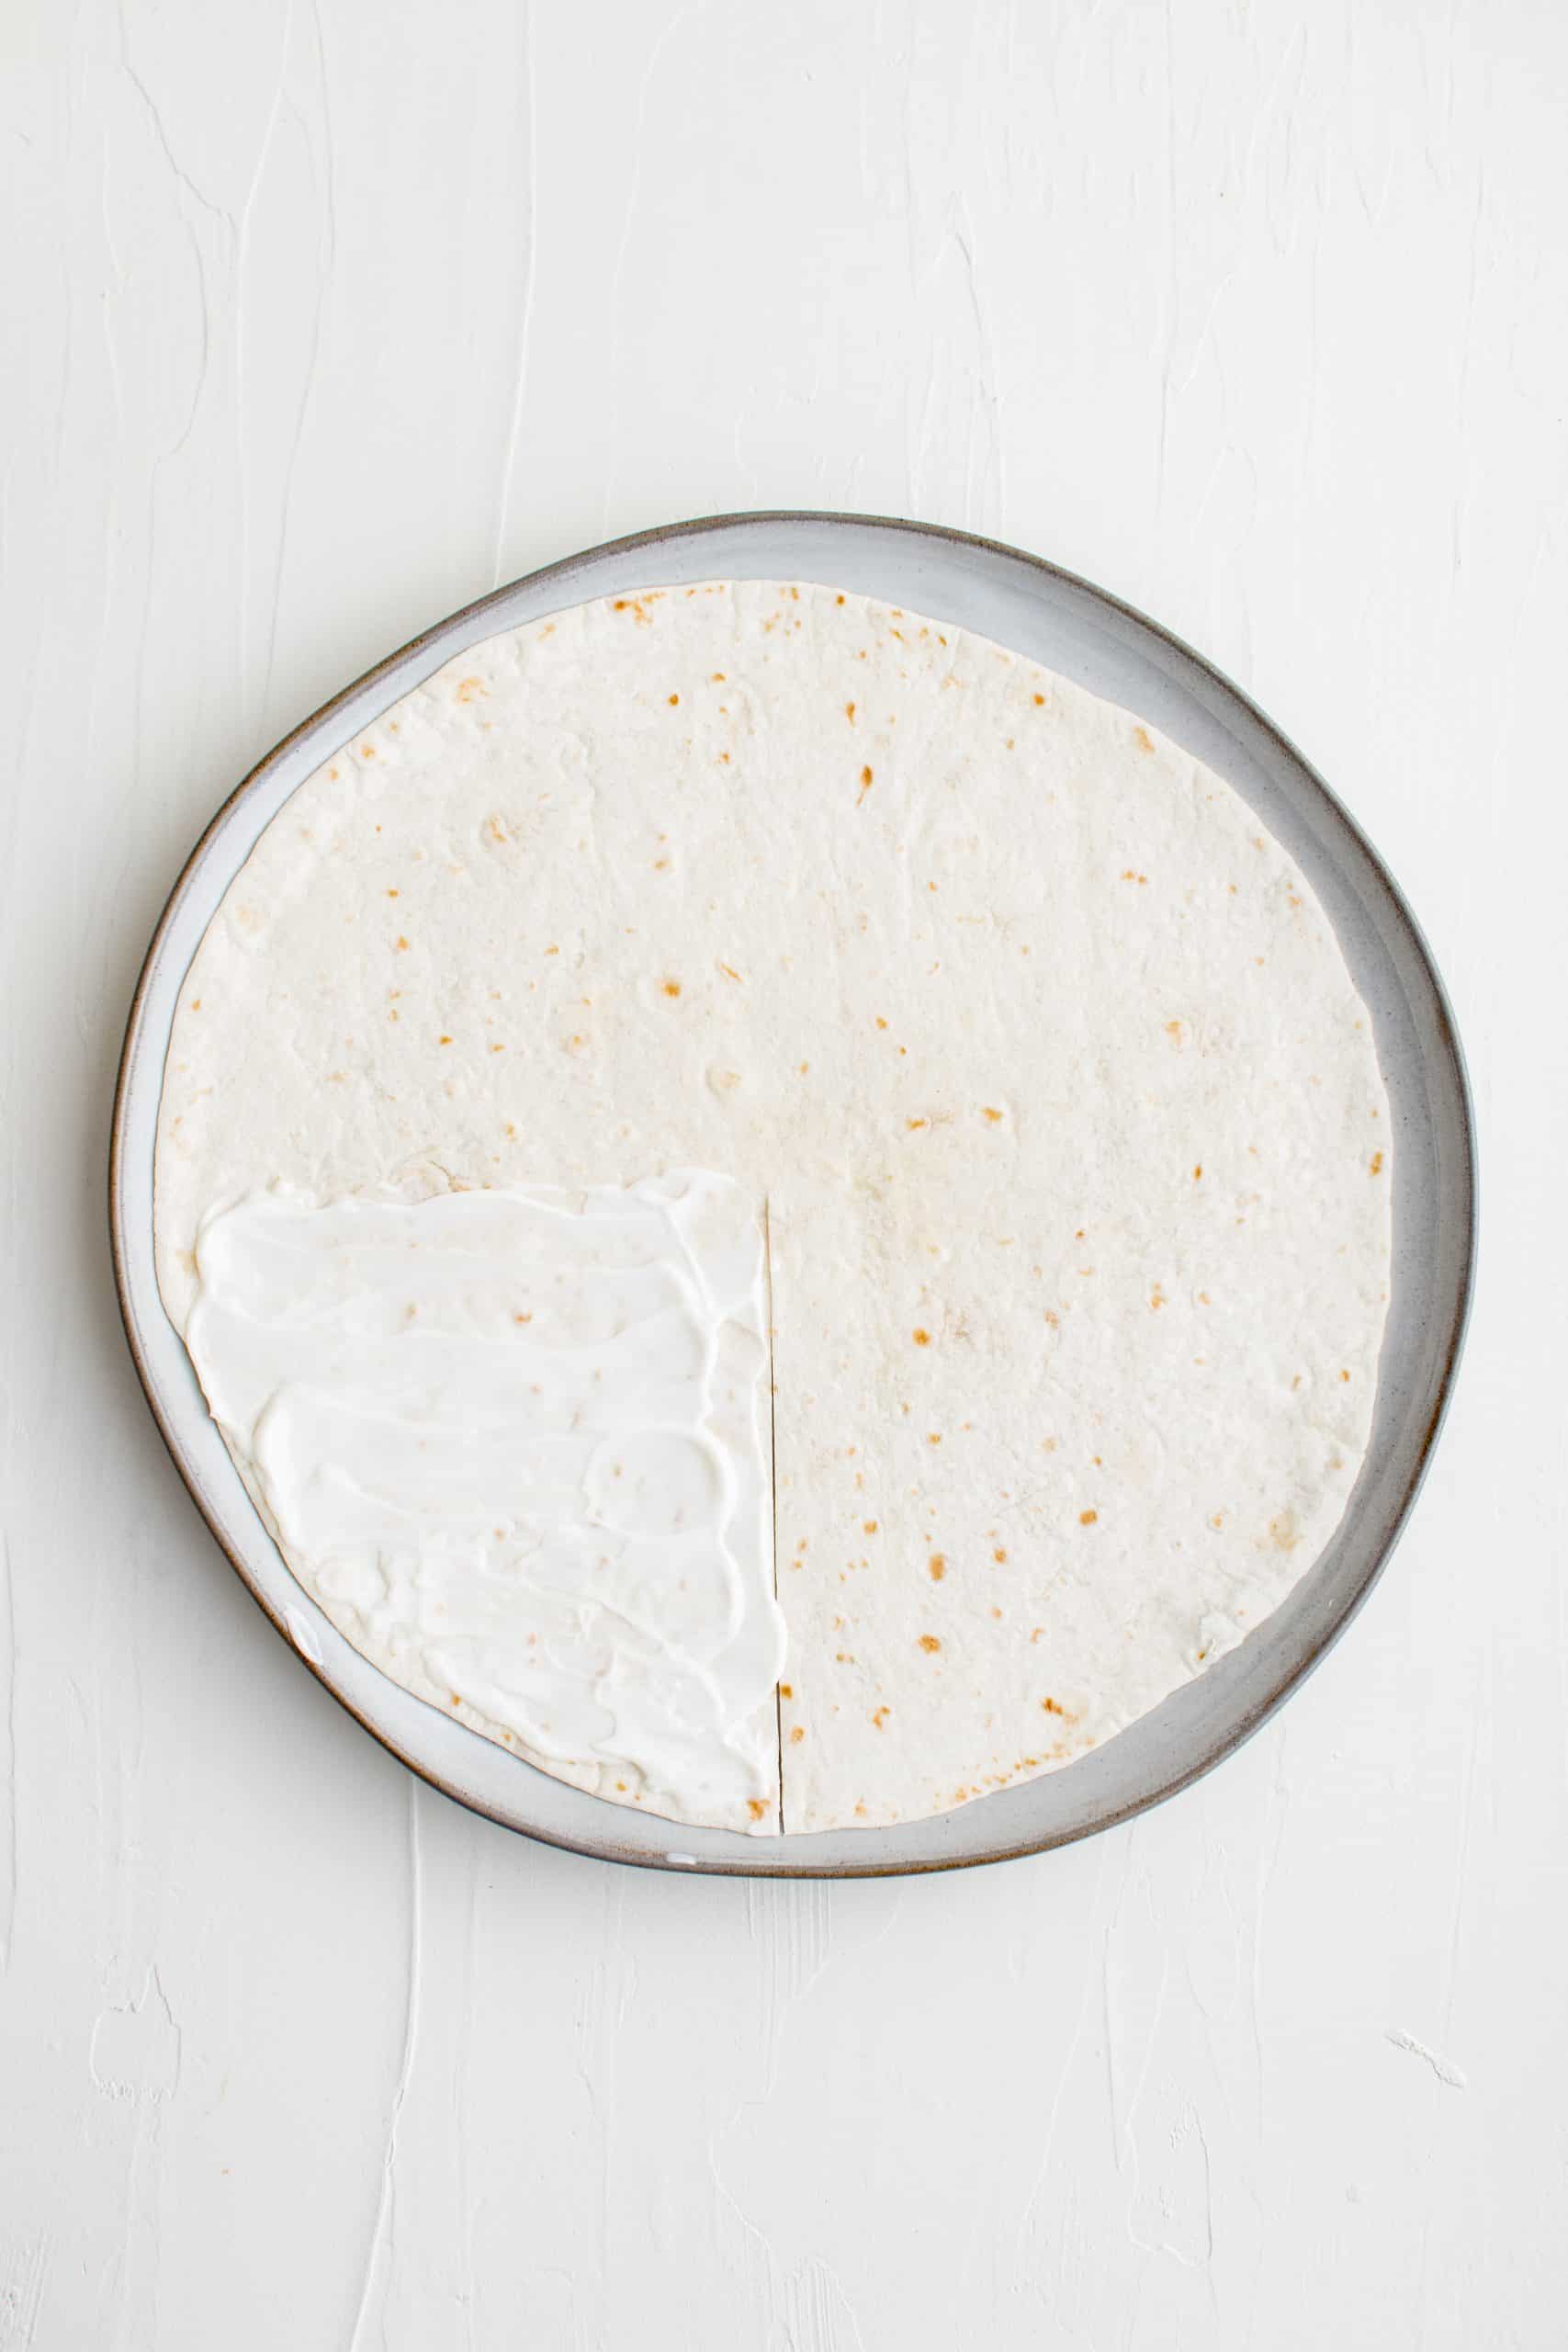 Tortilla on plate with slit cut in it.